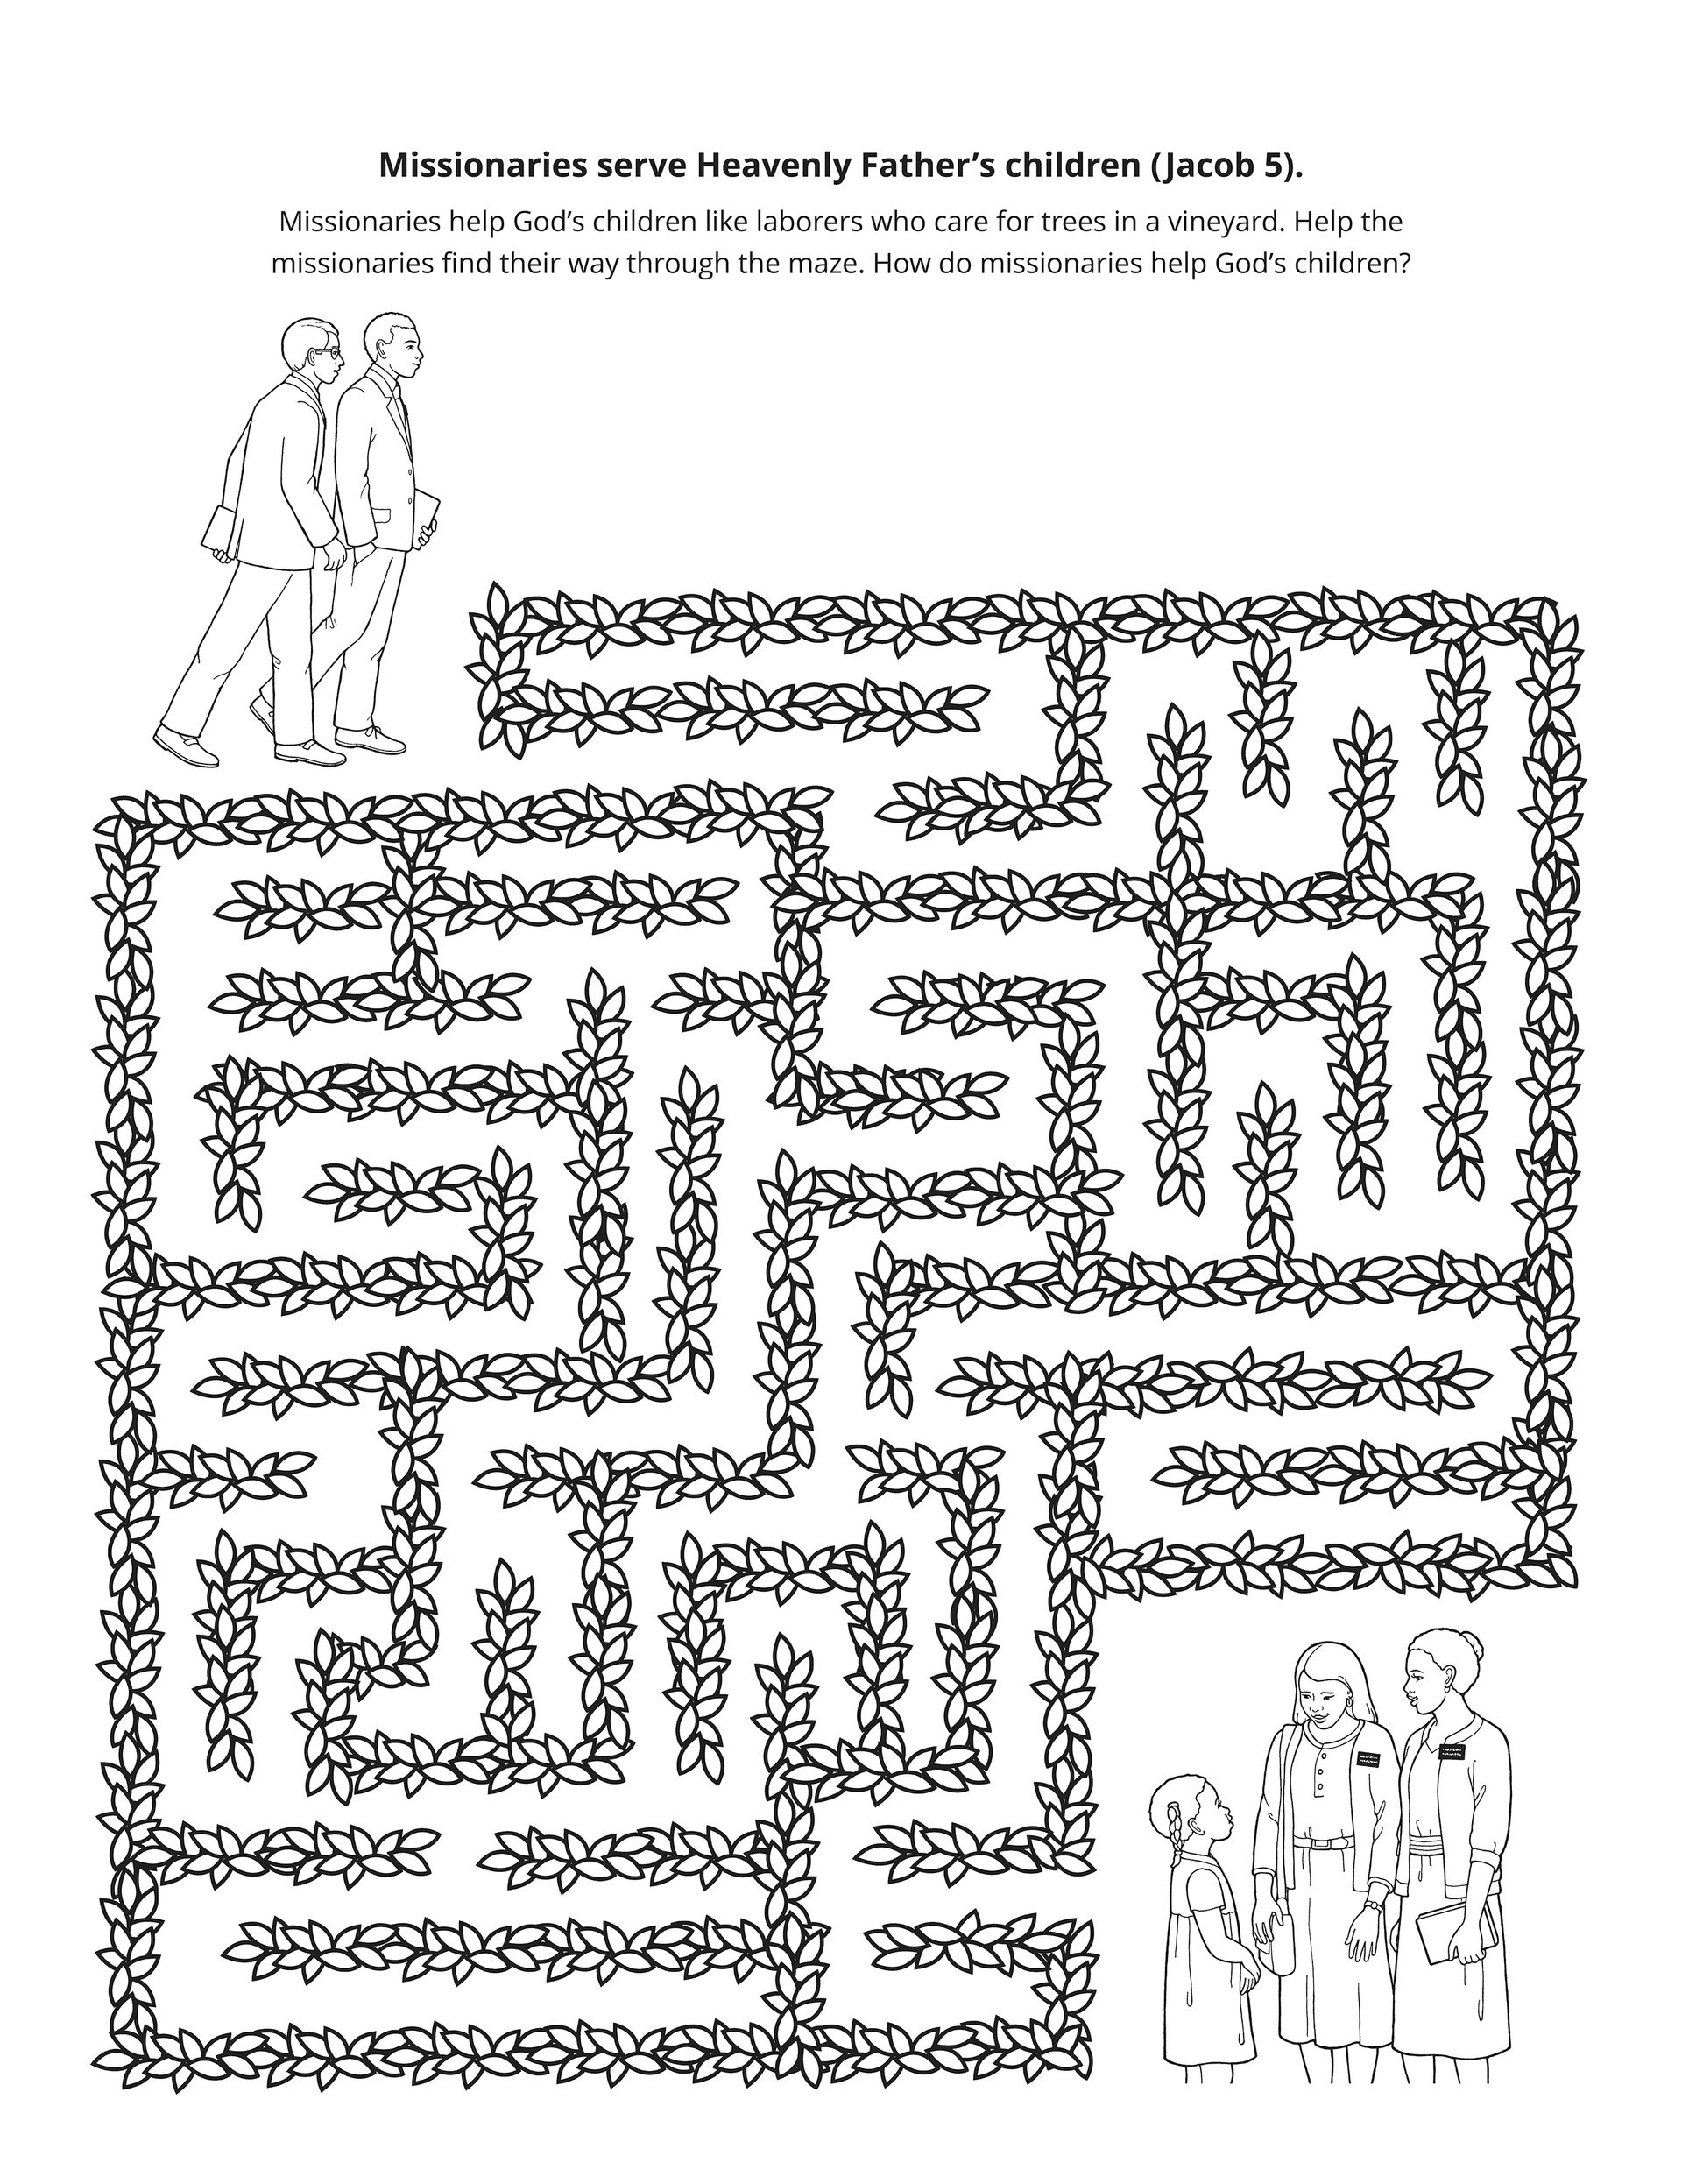 A maze activity depicting missionaries.